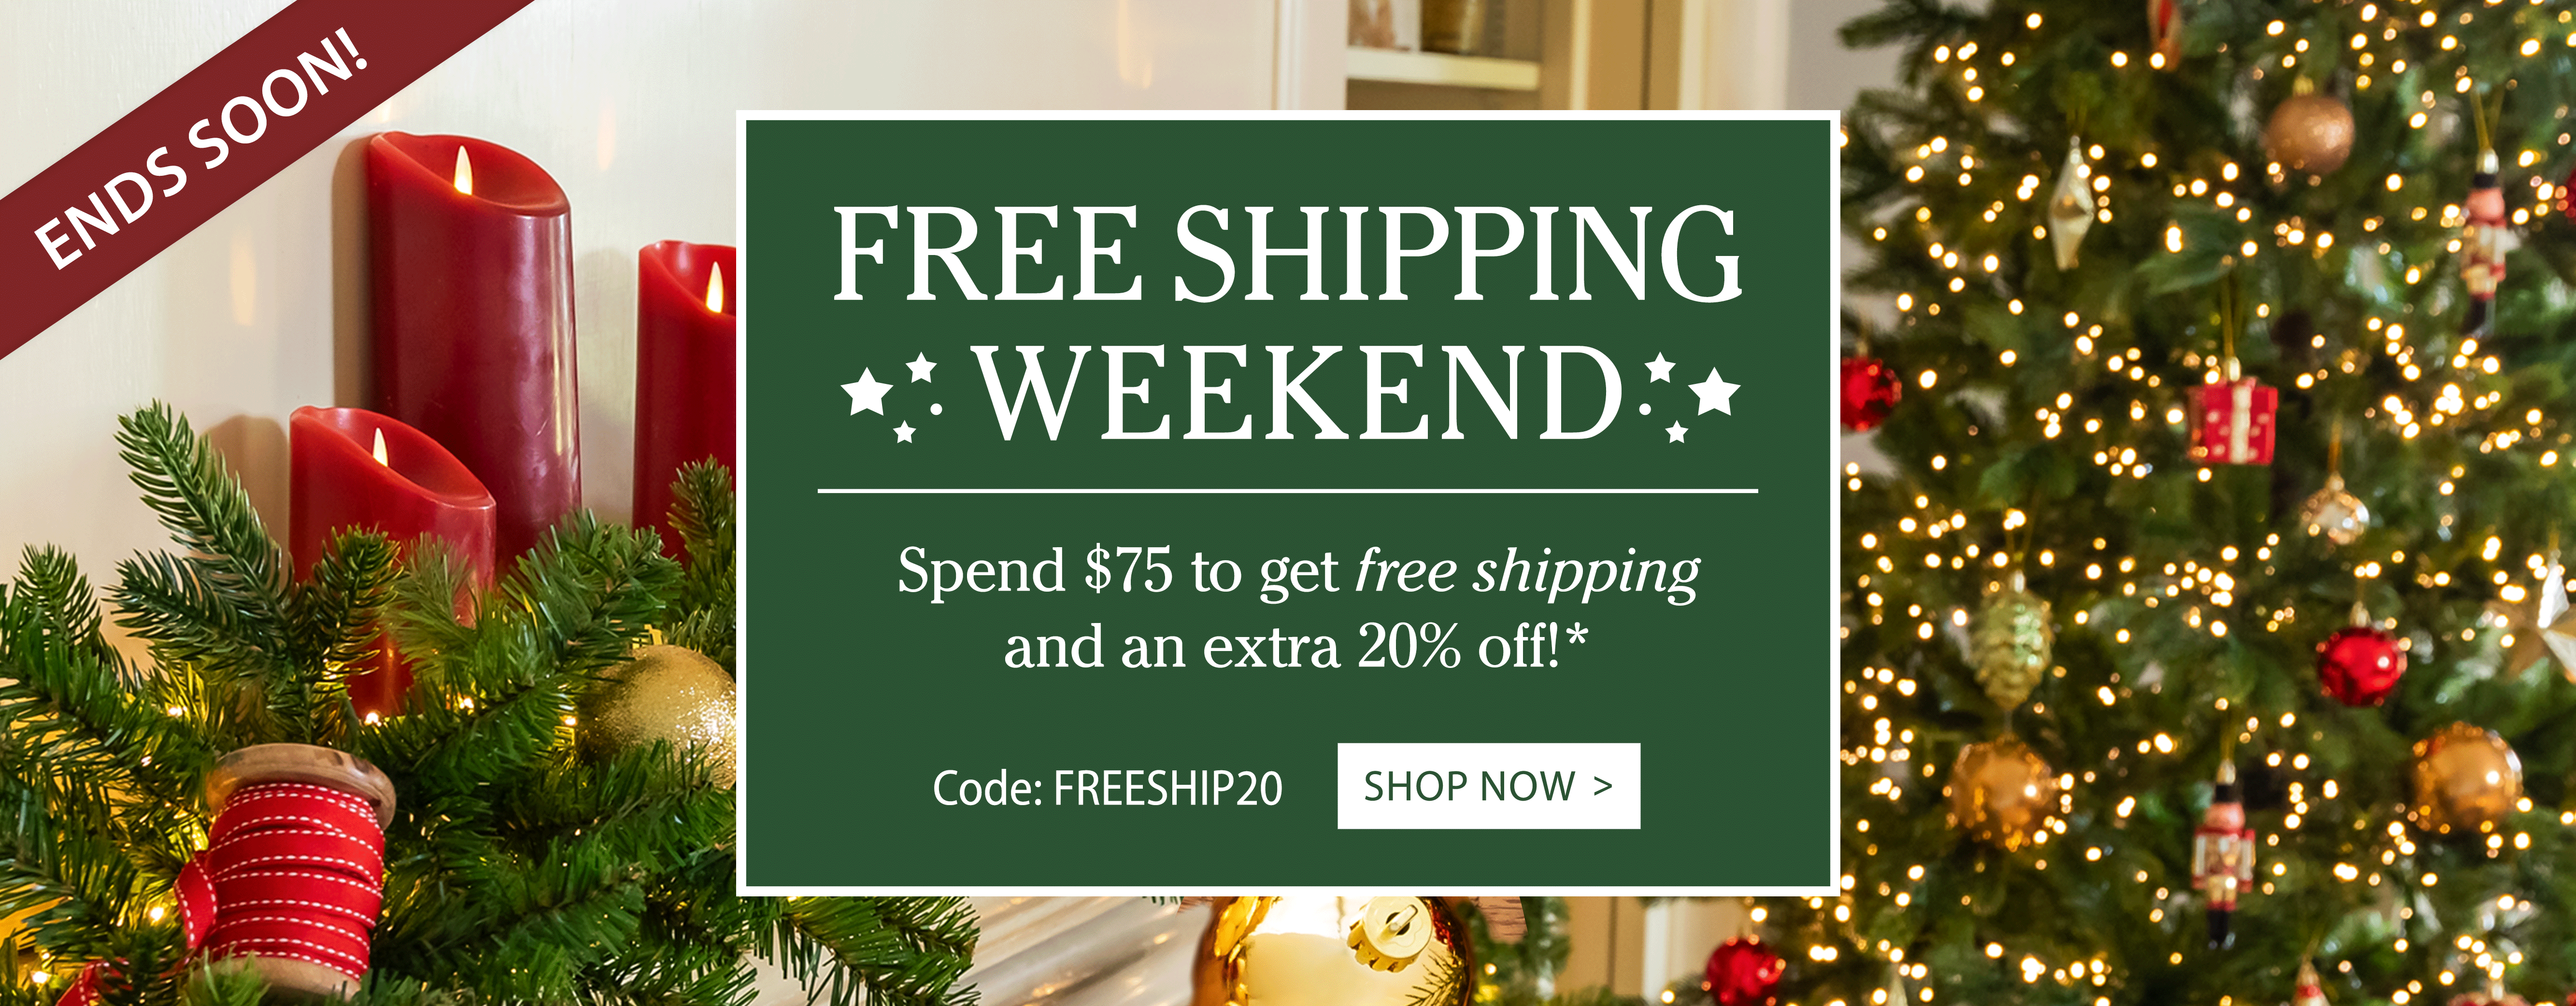 FREE SHIPPING WEEKEND Spend $75 to get free shipping and an extra 20% off* use code FREESHIP20.  SHOP NOW ENDS SOON